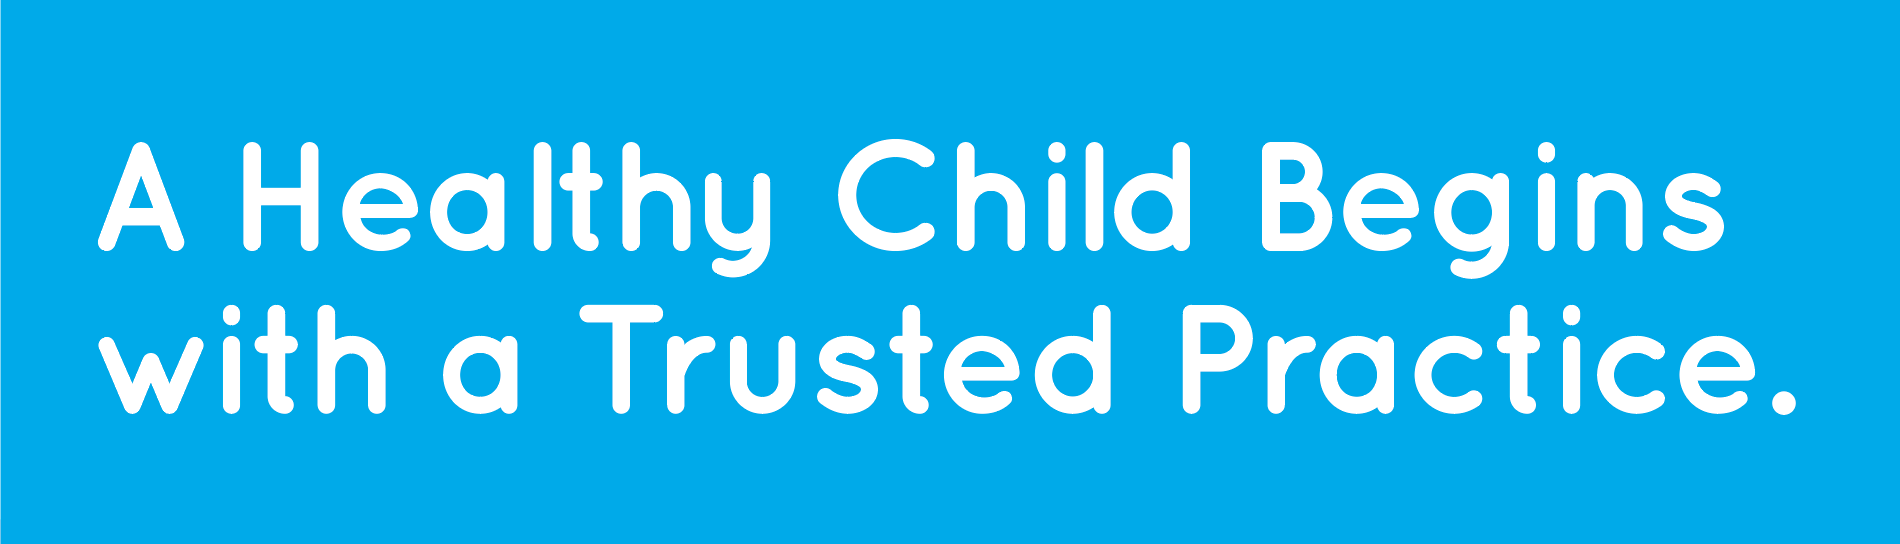 A Healthy Child Begins with a Trusted Practice.